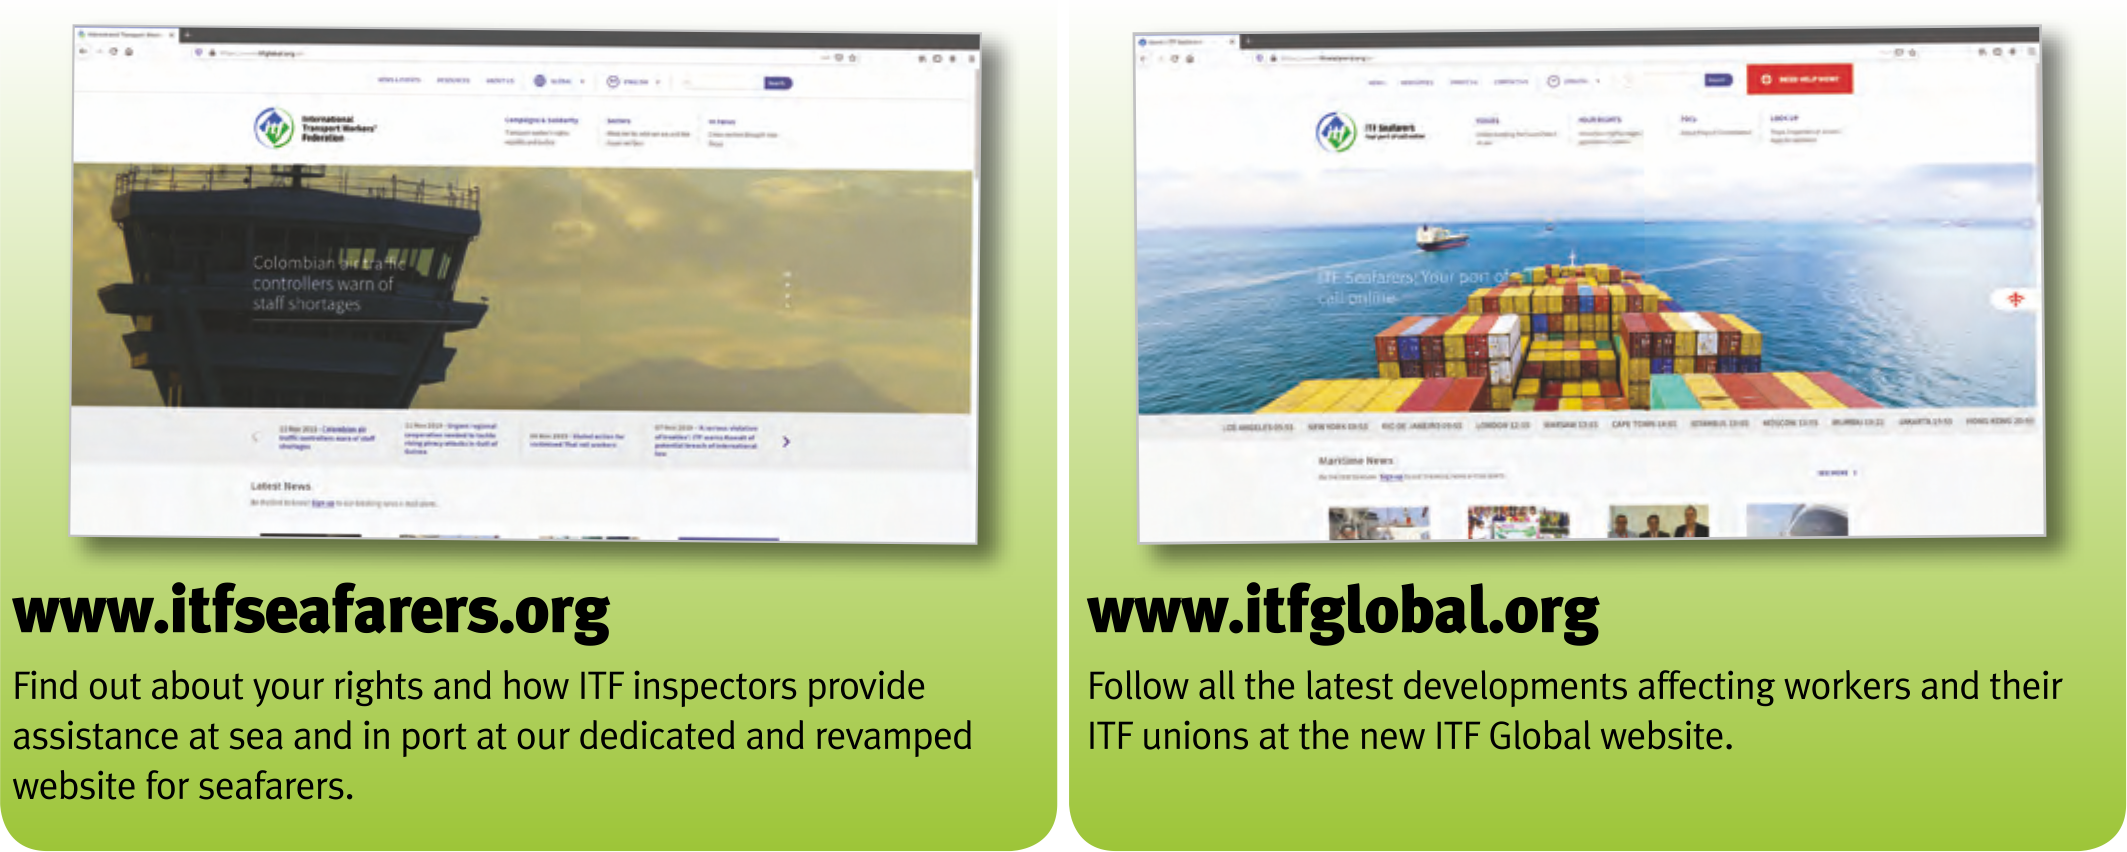 Seafarers - make the ITF your daily port of call for information and advice